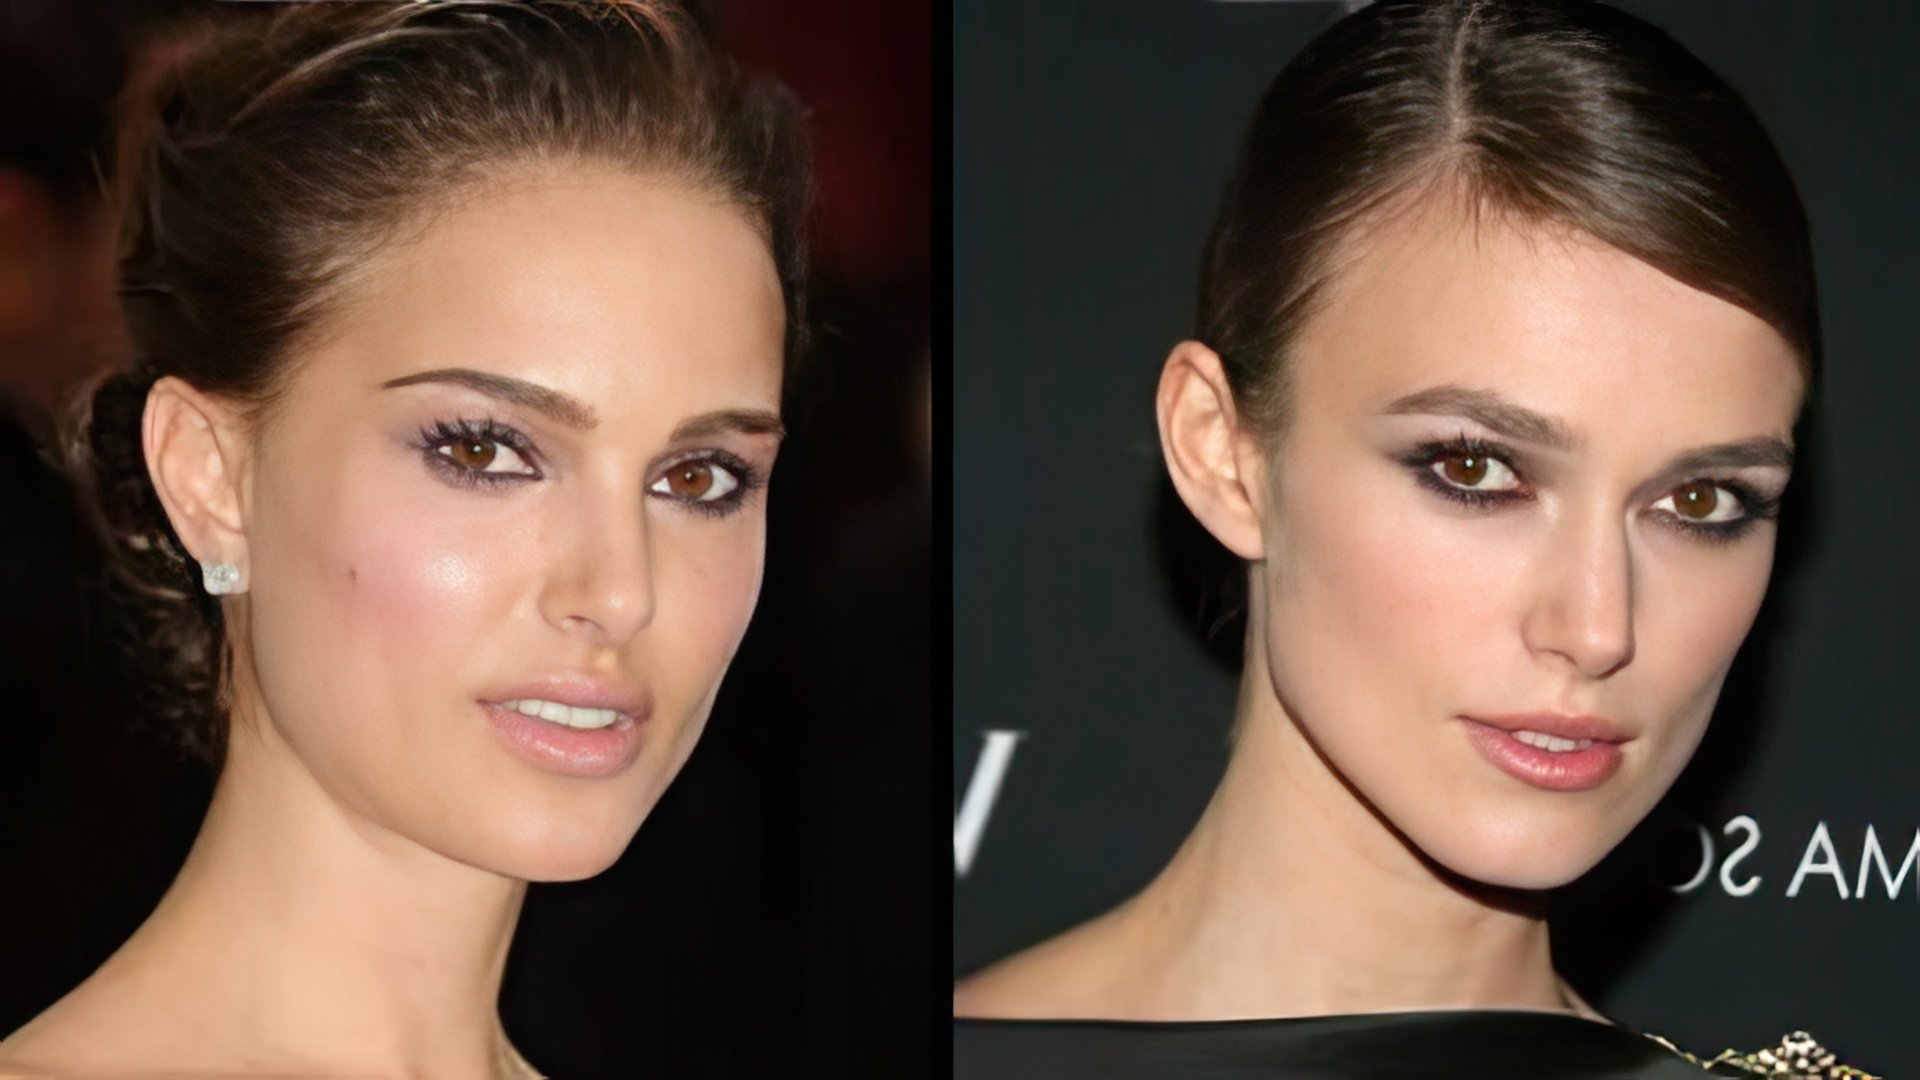 Keira Knightley and Natalie Portman look very much alike, although they aren’t related